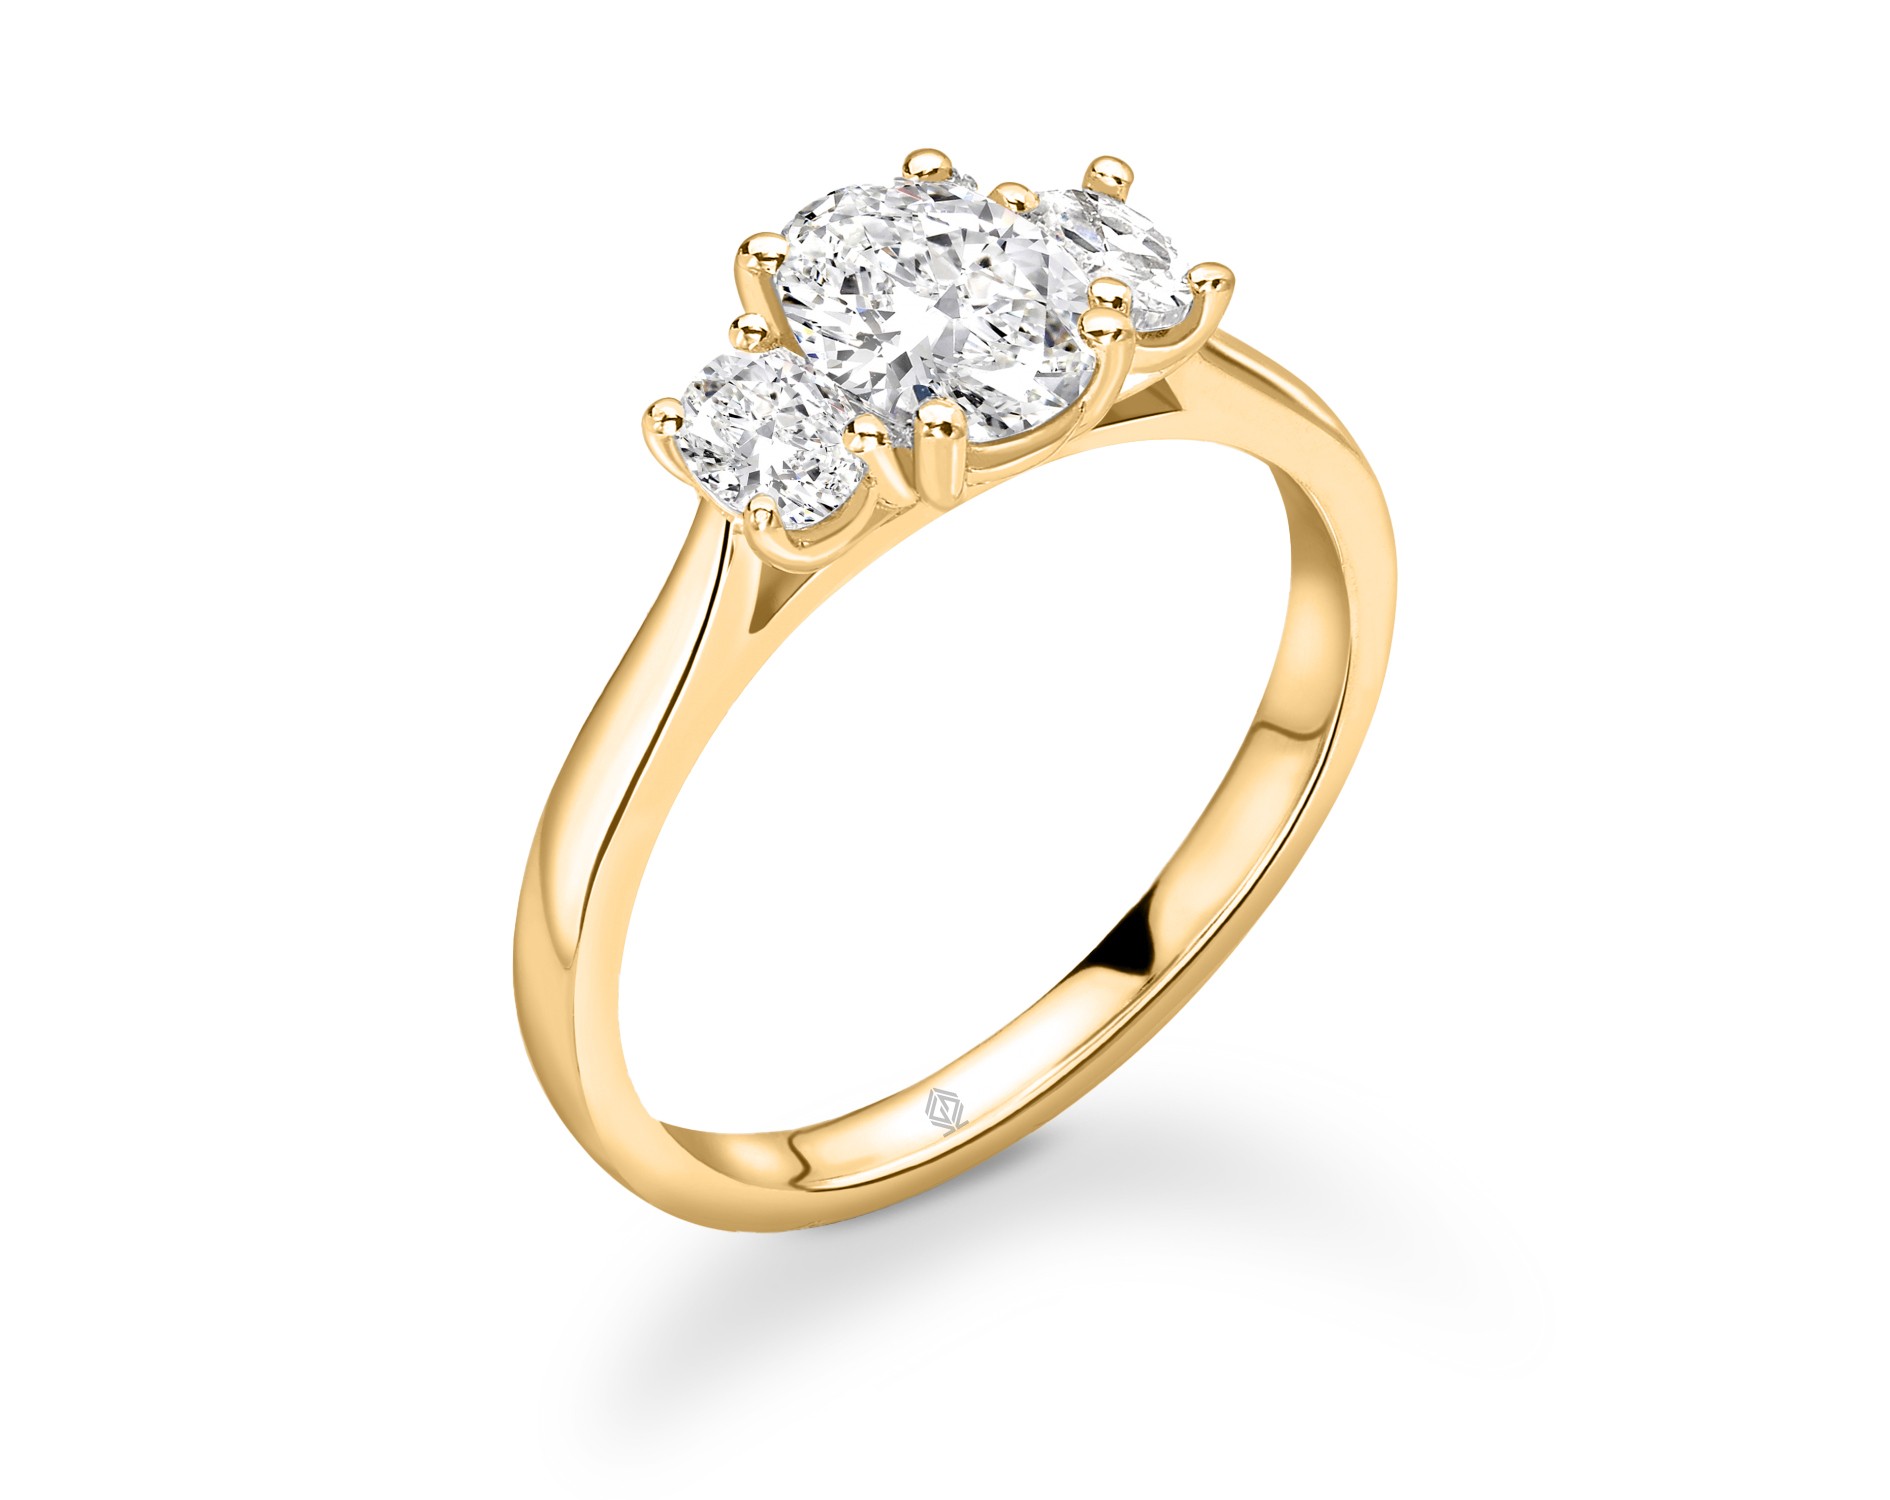 18K YELLOW GOLD OVAL CUT TRILOGY DIAMOND ENGAGEMENT RING